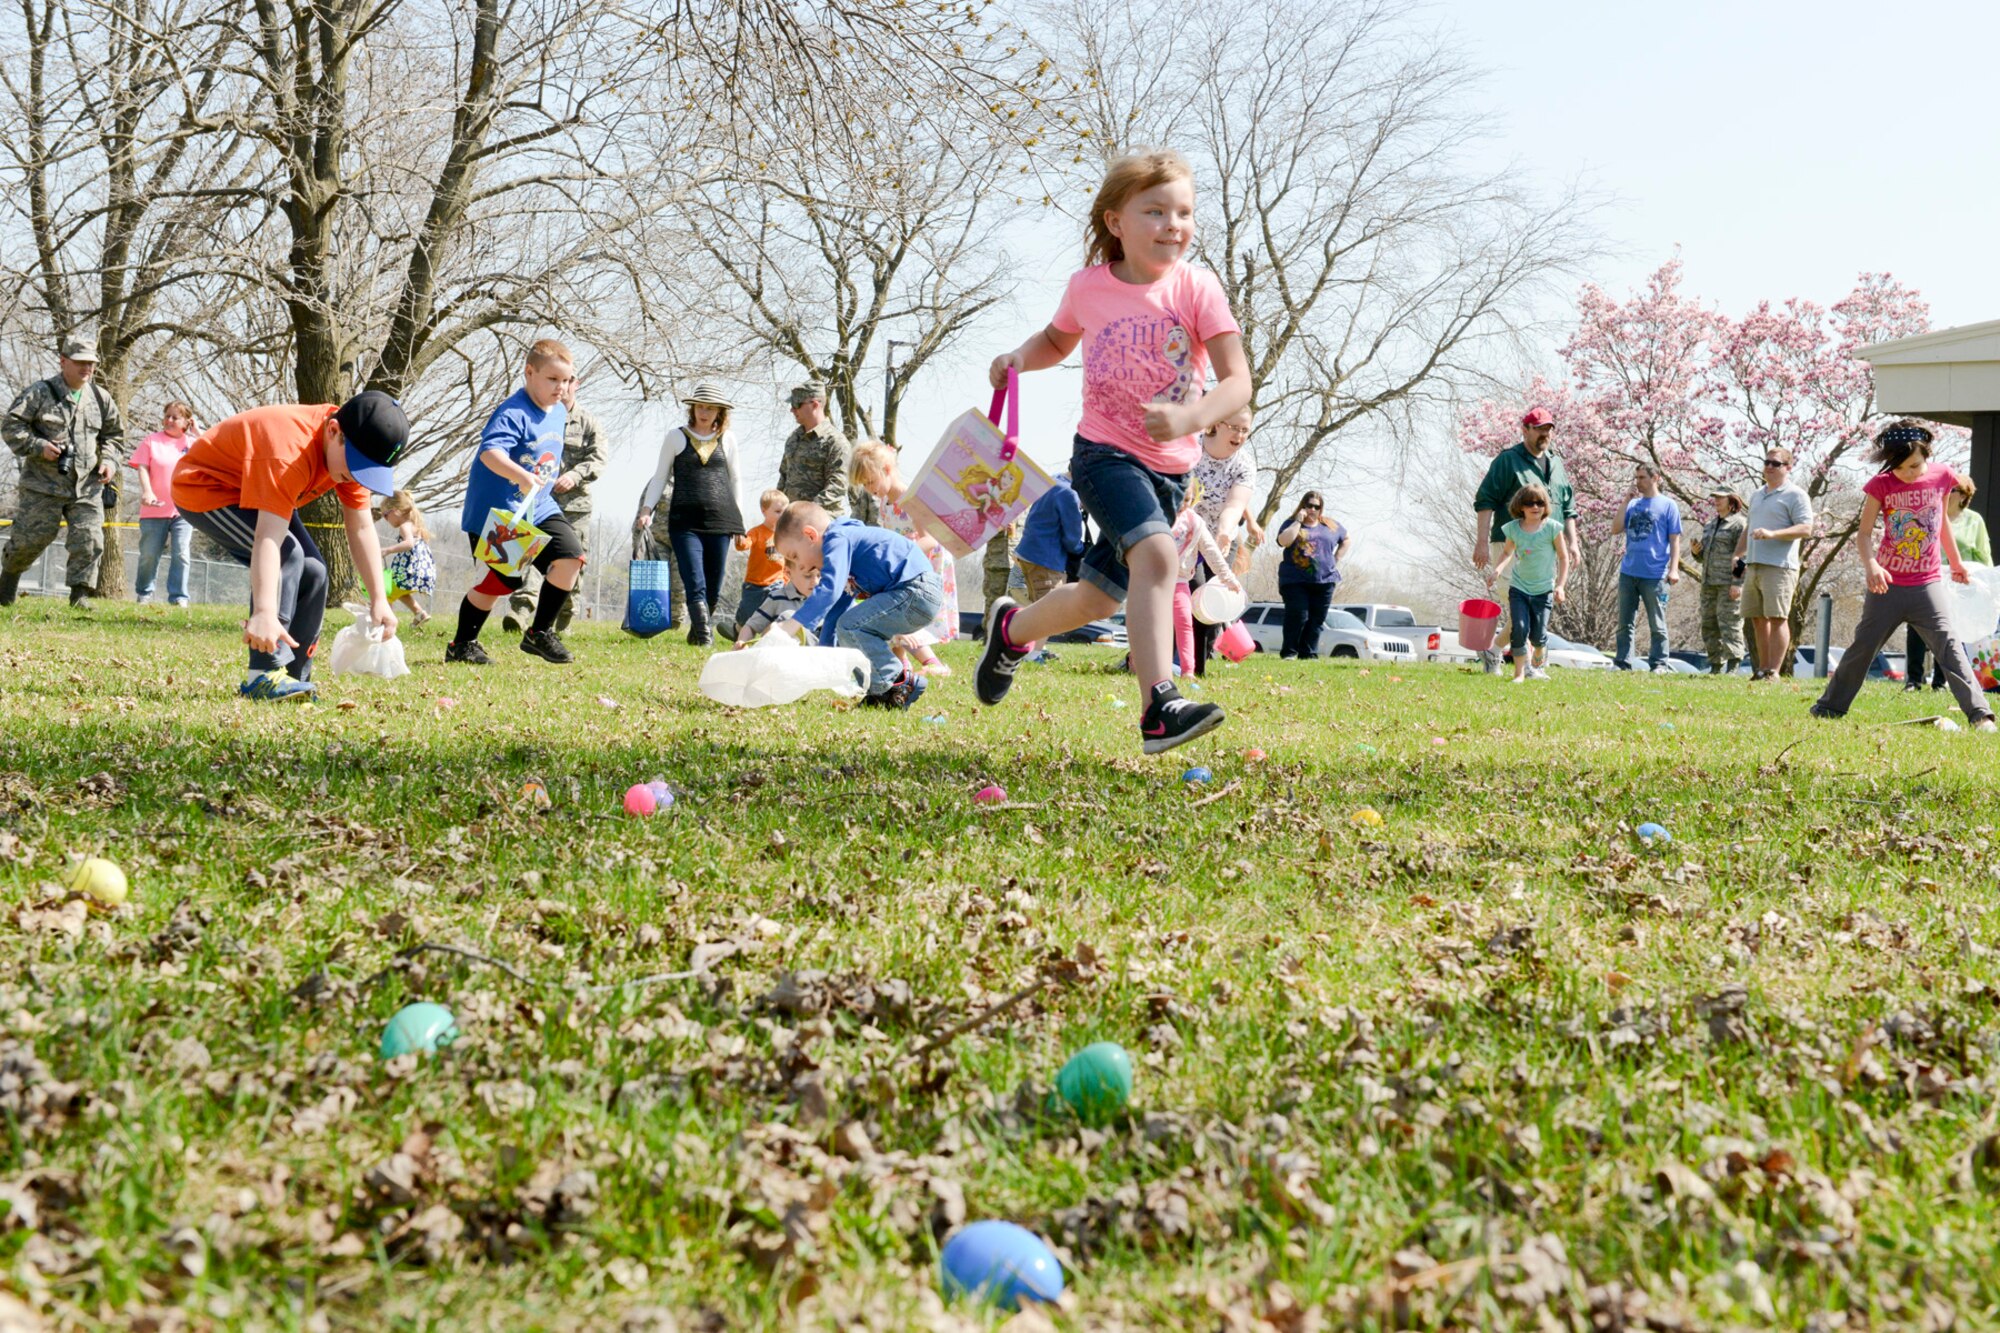 Members of the 132nd Wing (132WG), Des Moines, Iowa and their families participate in the 2015 Annual Easter Egg Hunt held outside of the Dining Facility of the 132WG on Saturday, April 11, 2015.  (U.S. Air National Guard photo by Staff Sgt. Linda K. Burger/Released)